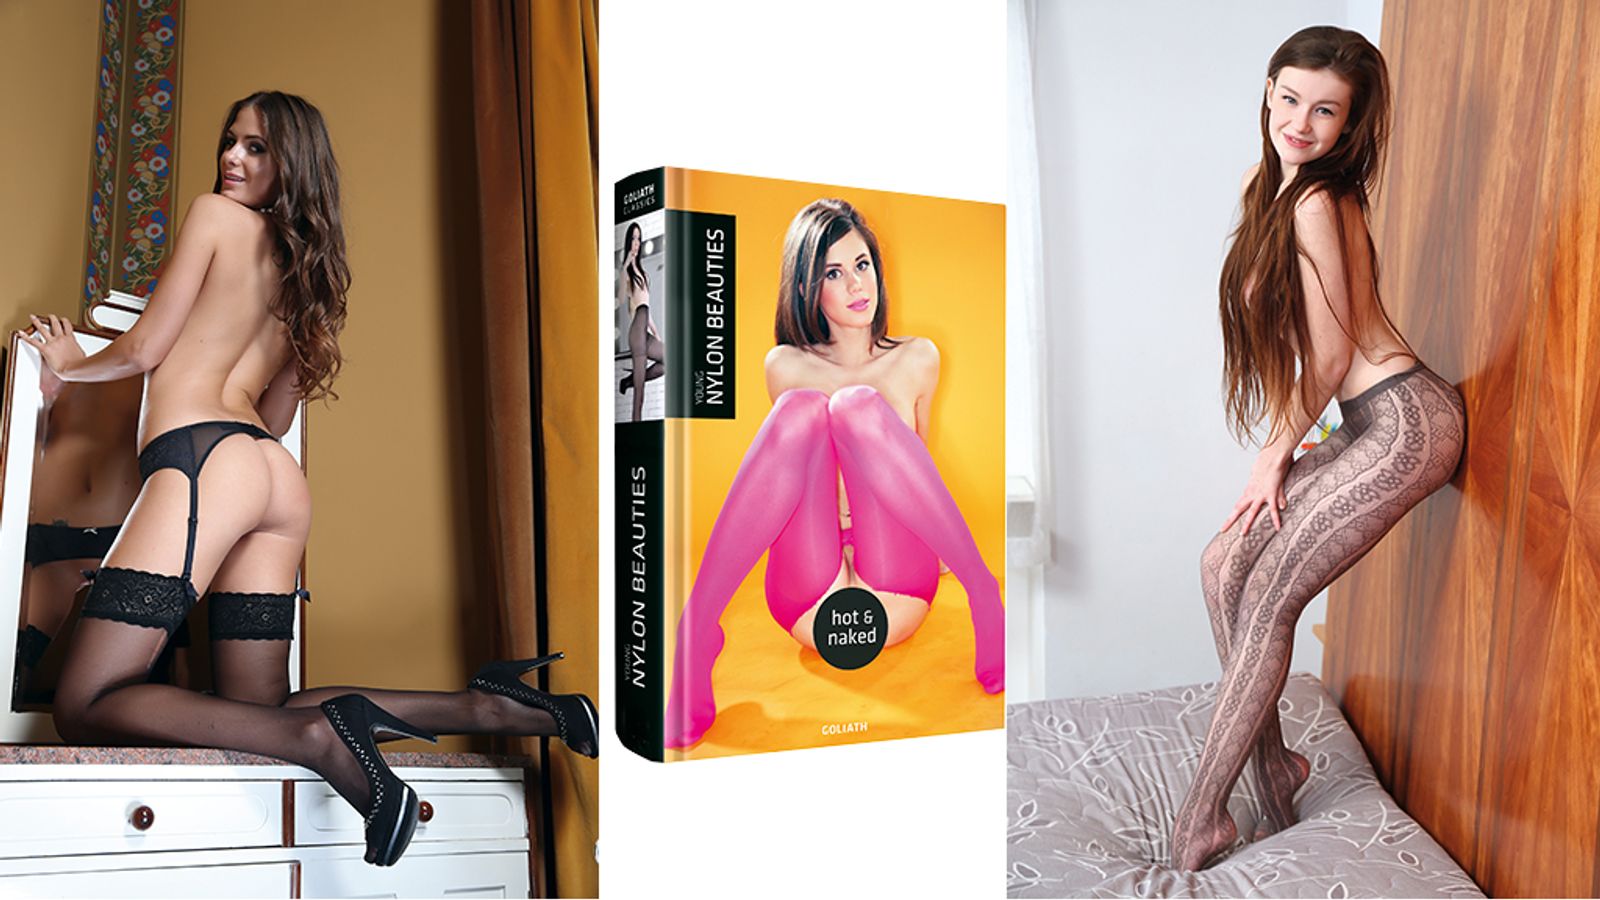 Nylons Your Fetish? Then There's A New Book For You